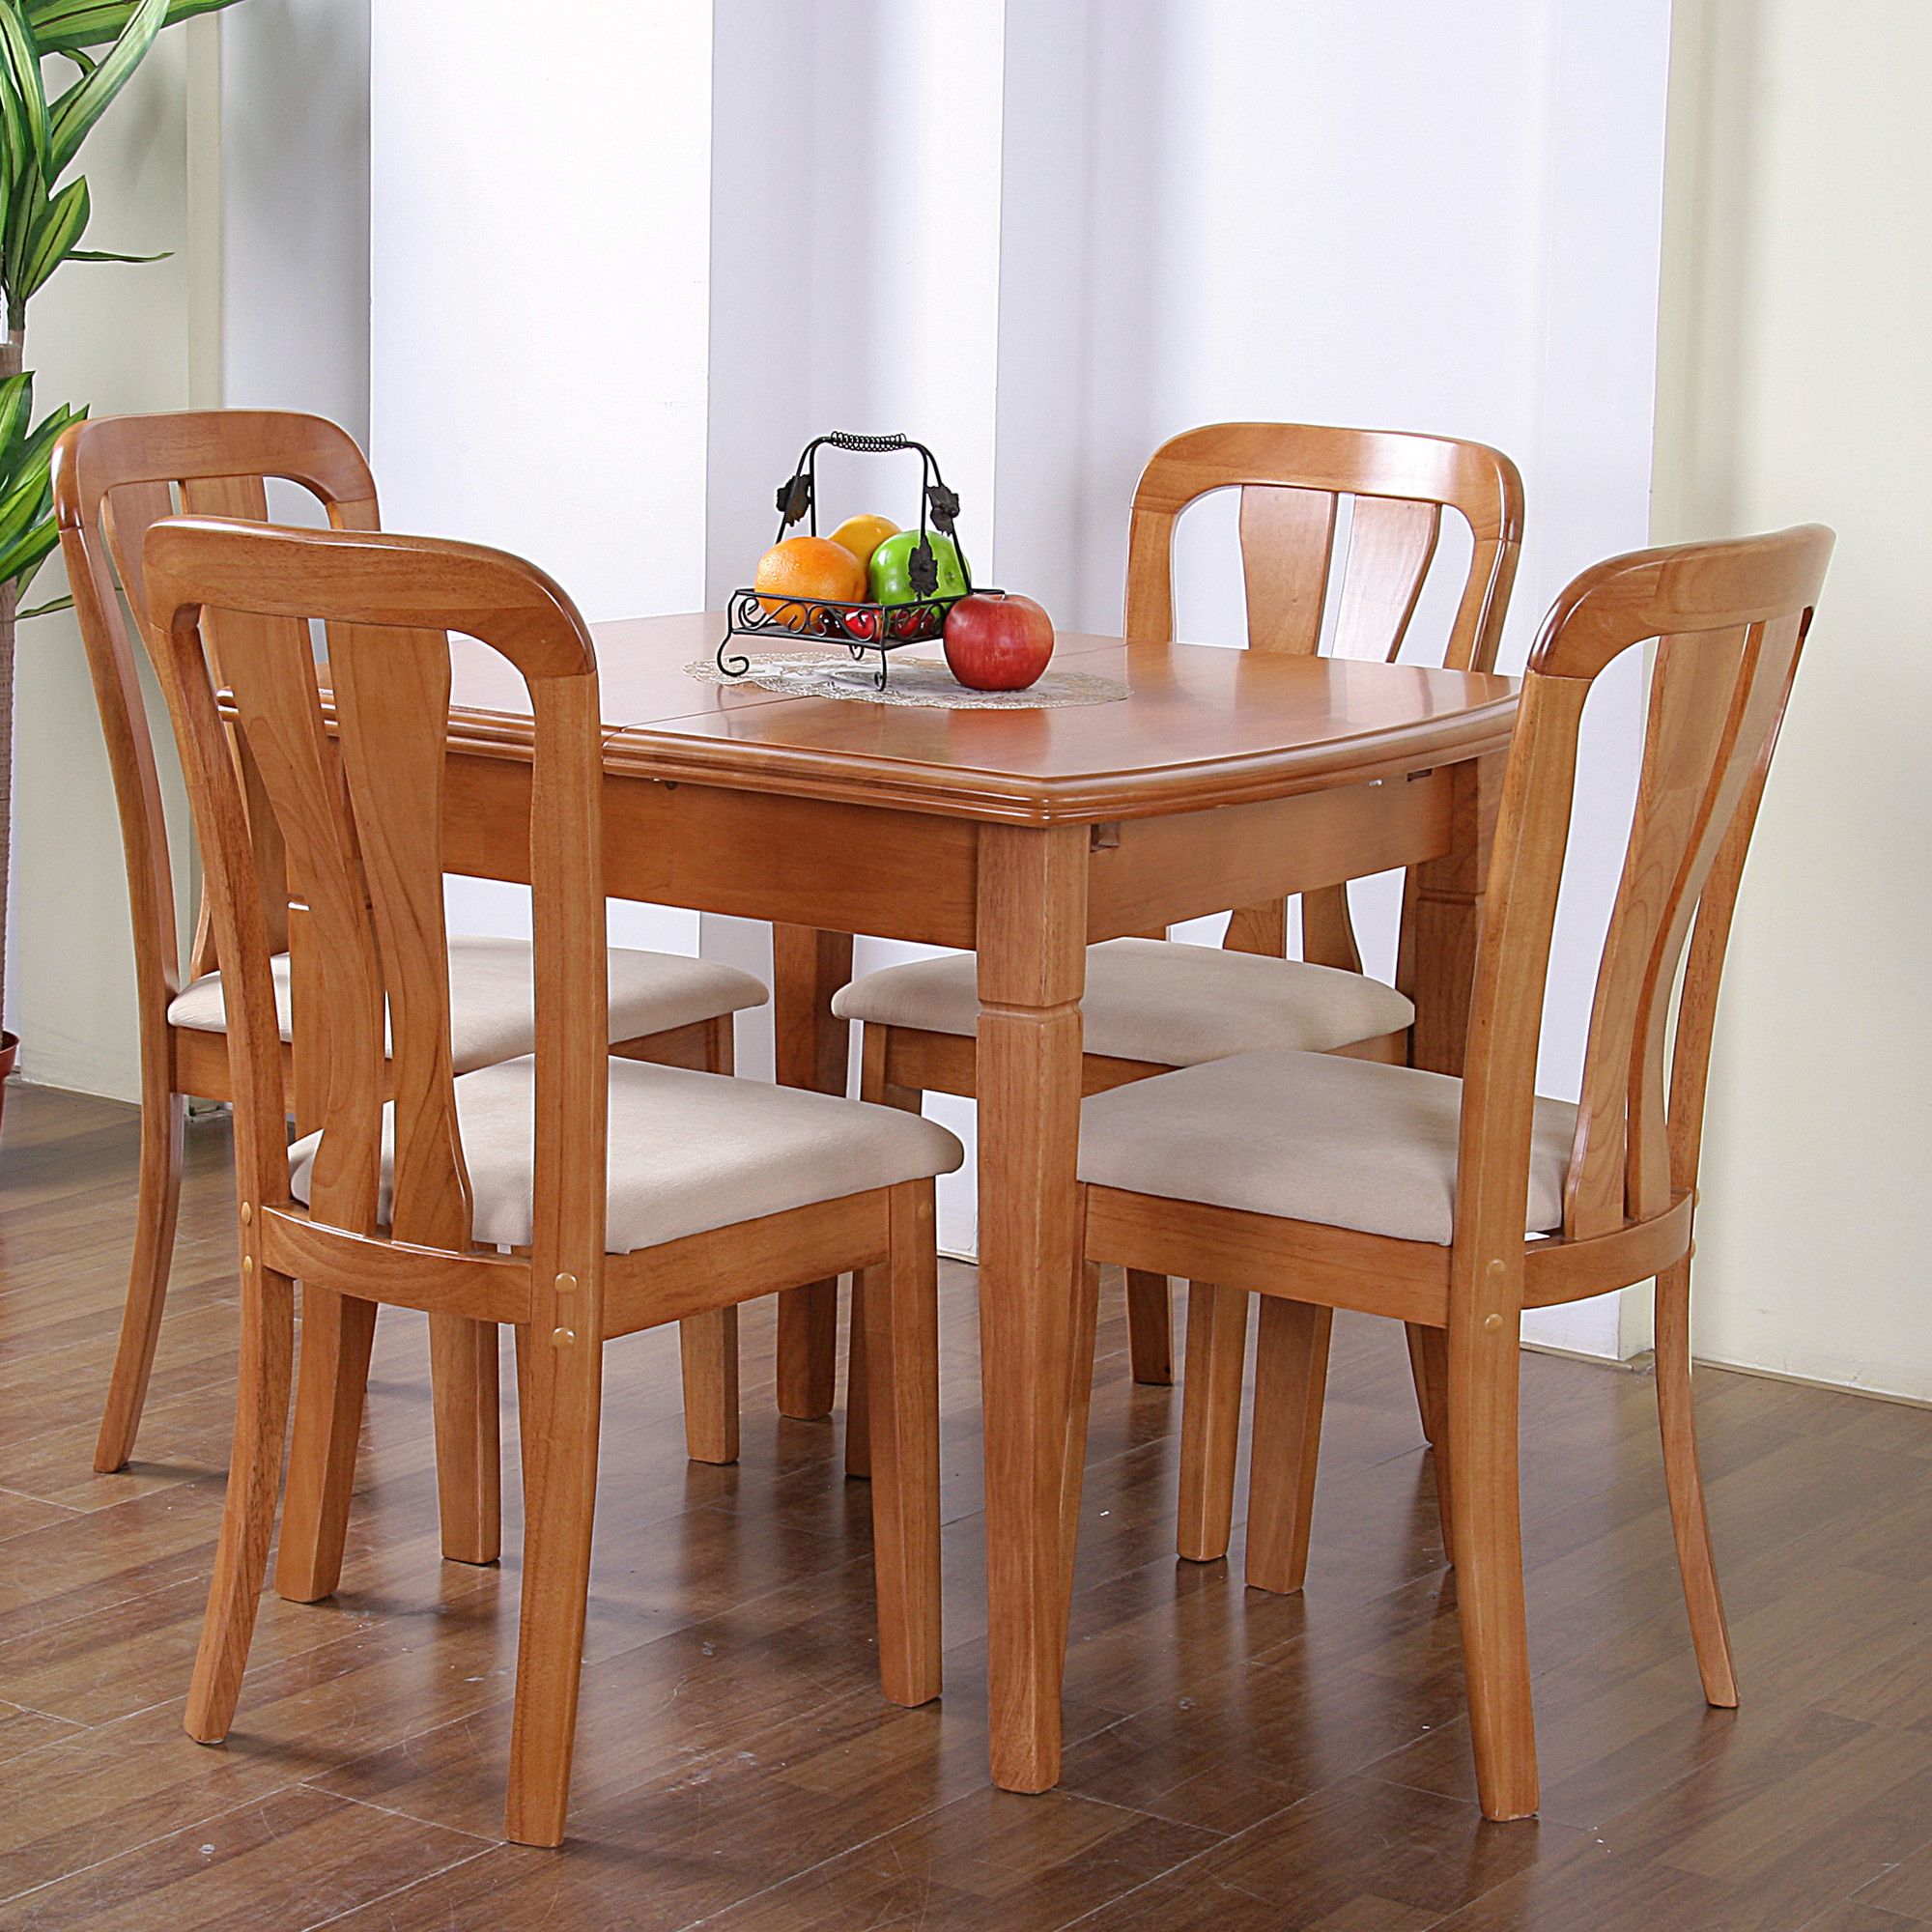 G&P Furniture Windsor House 5-Piece Lincoln Extending Dining Set with Slatted Back Chair - Maple at Tesco Direct